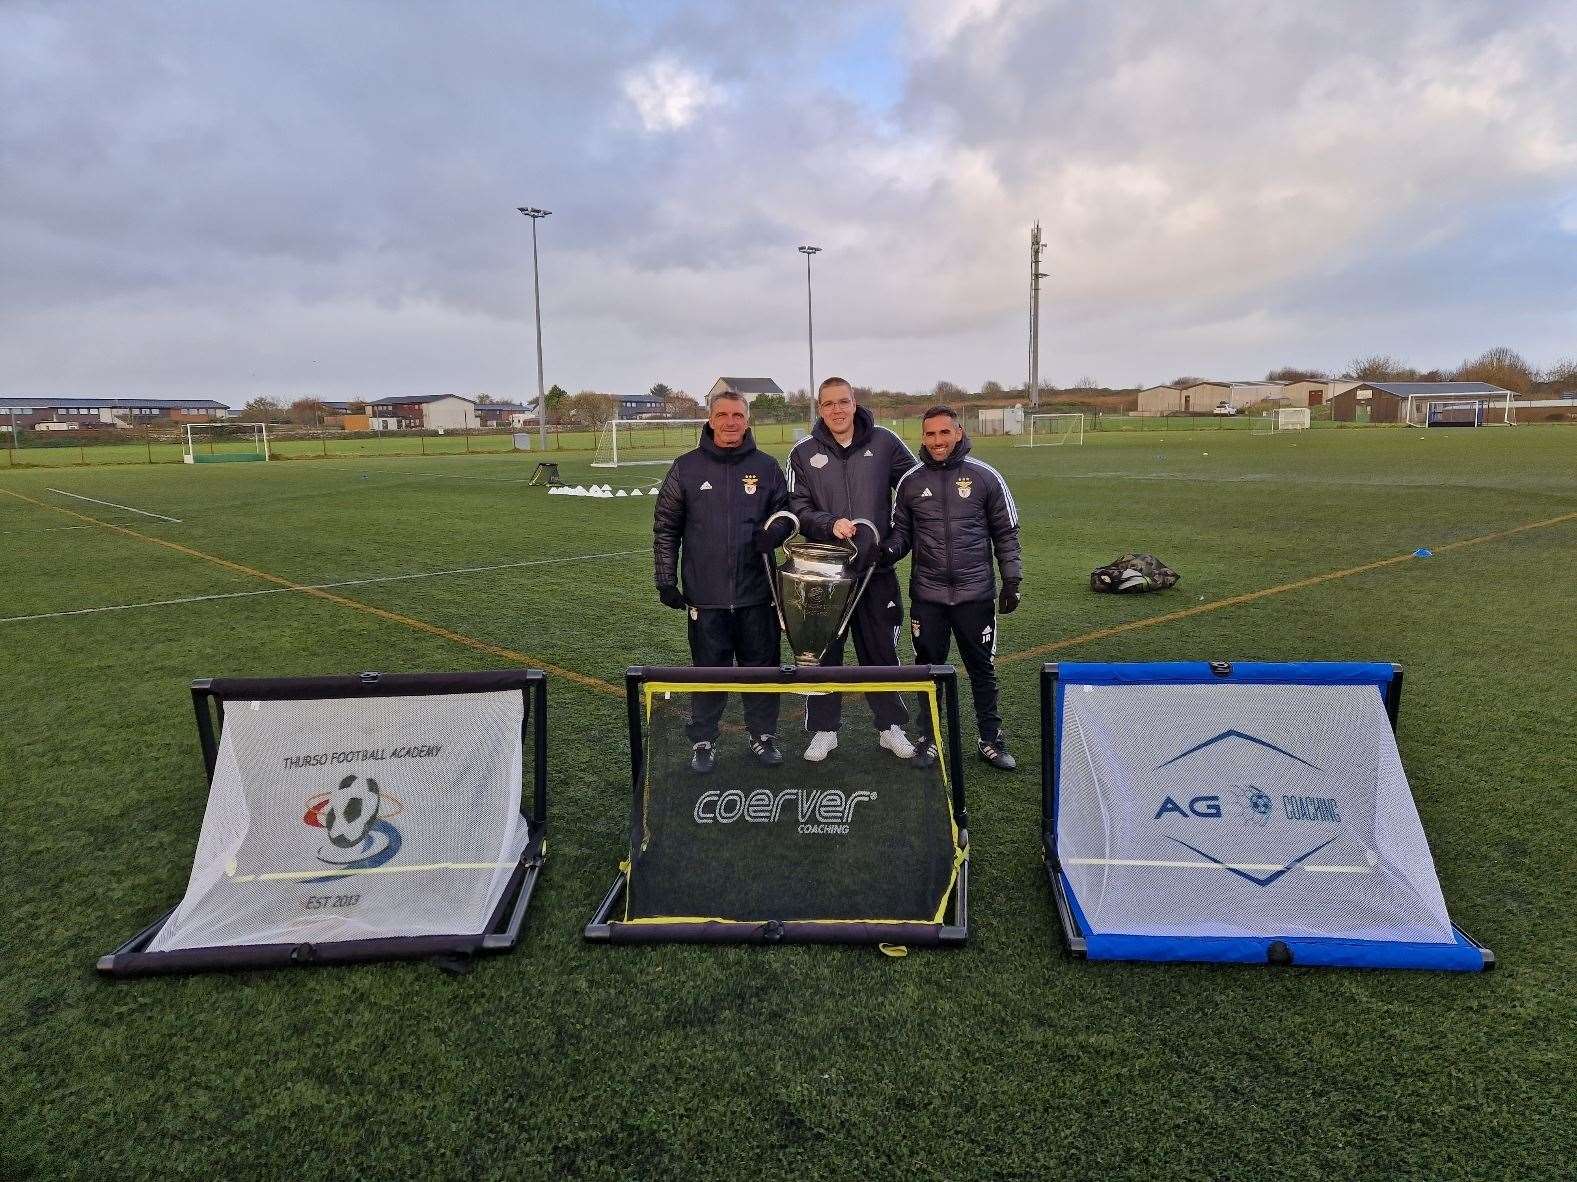 Benfica coaches Joao Rosmaniho and Serguei Kandaurov, pictured with Thurso Football Academy head of coaching Alyn Gunn, brought a replica of the European Cup to Caithness.